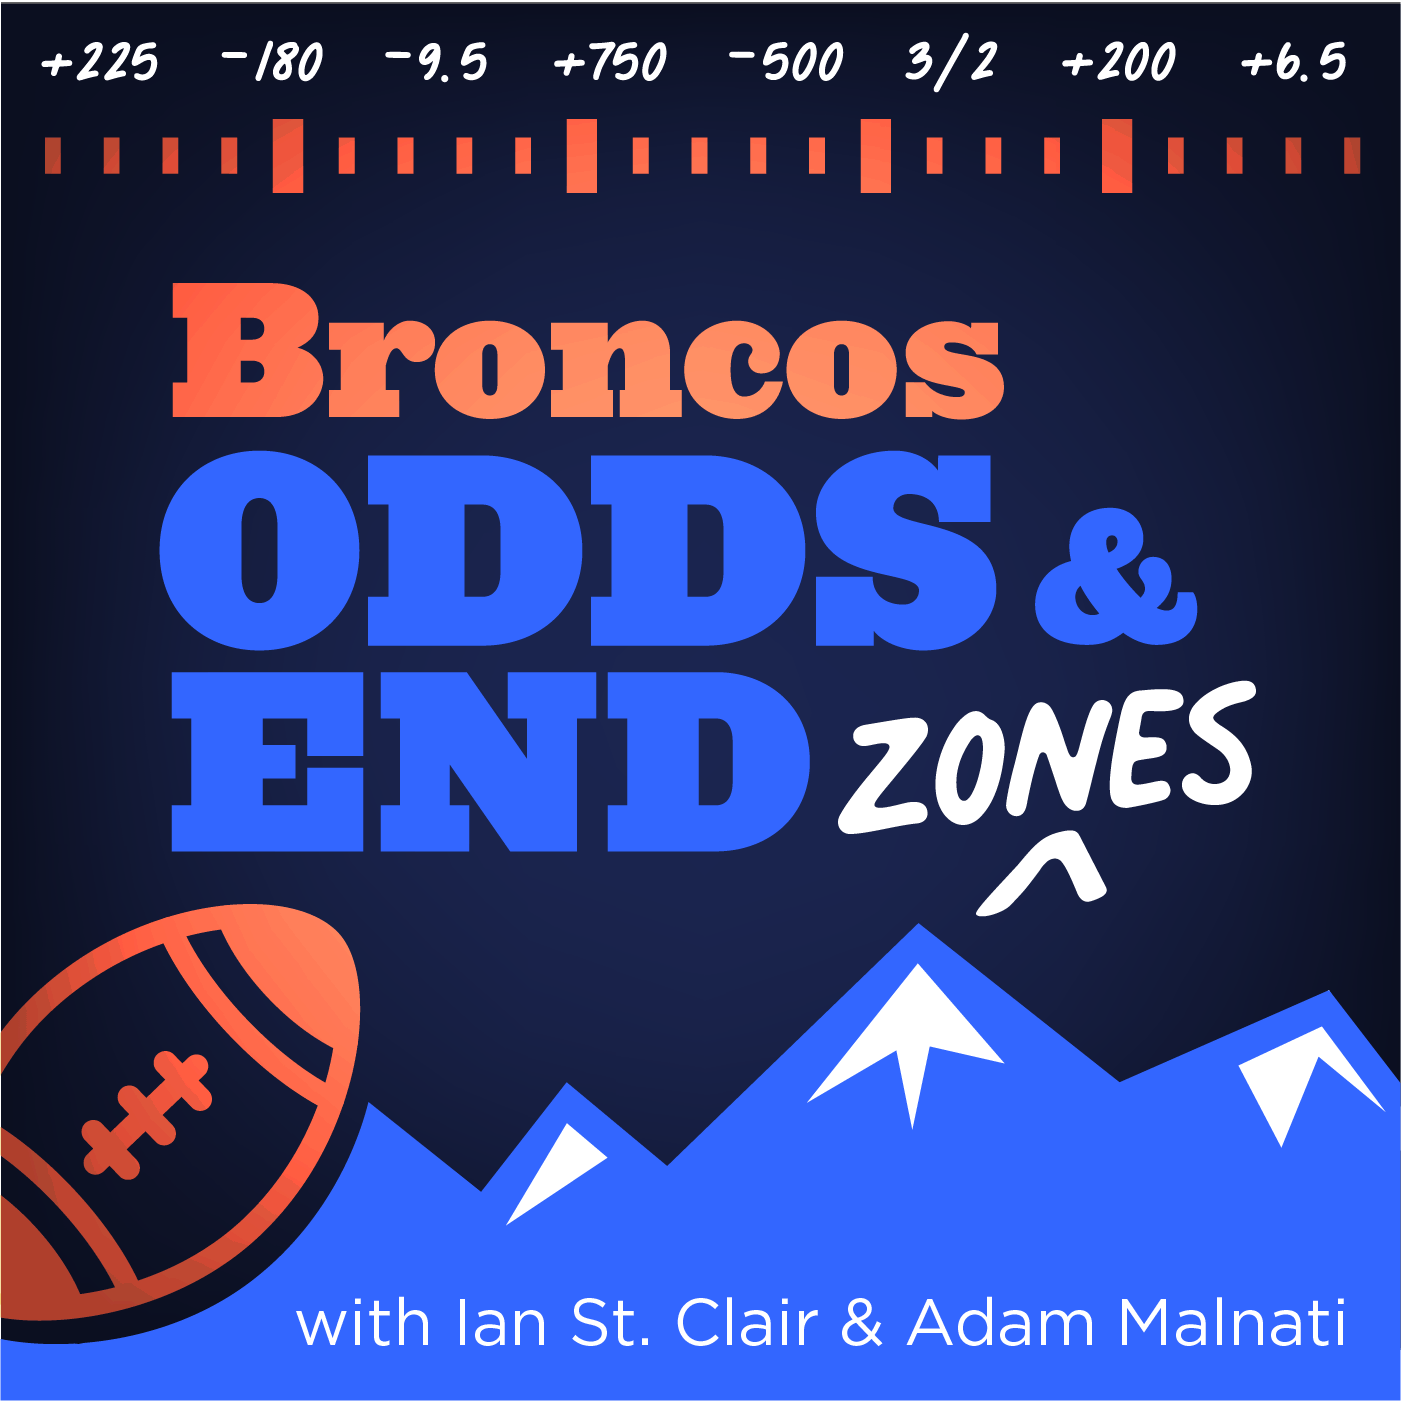 Adam & Ian take an early look at the Broncos schedule